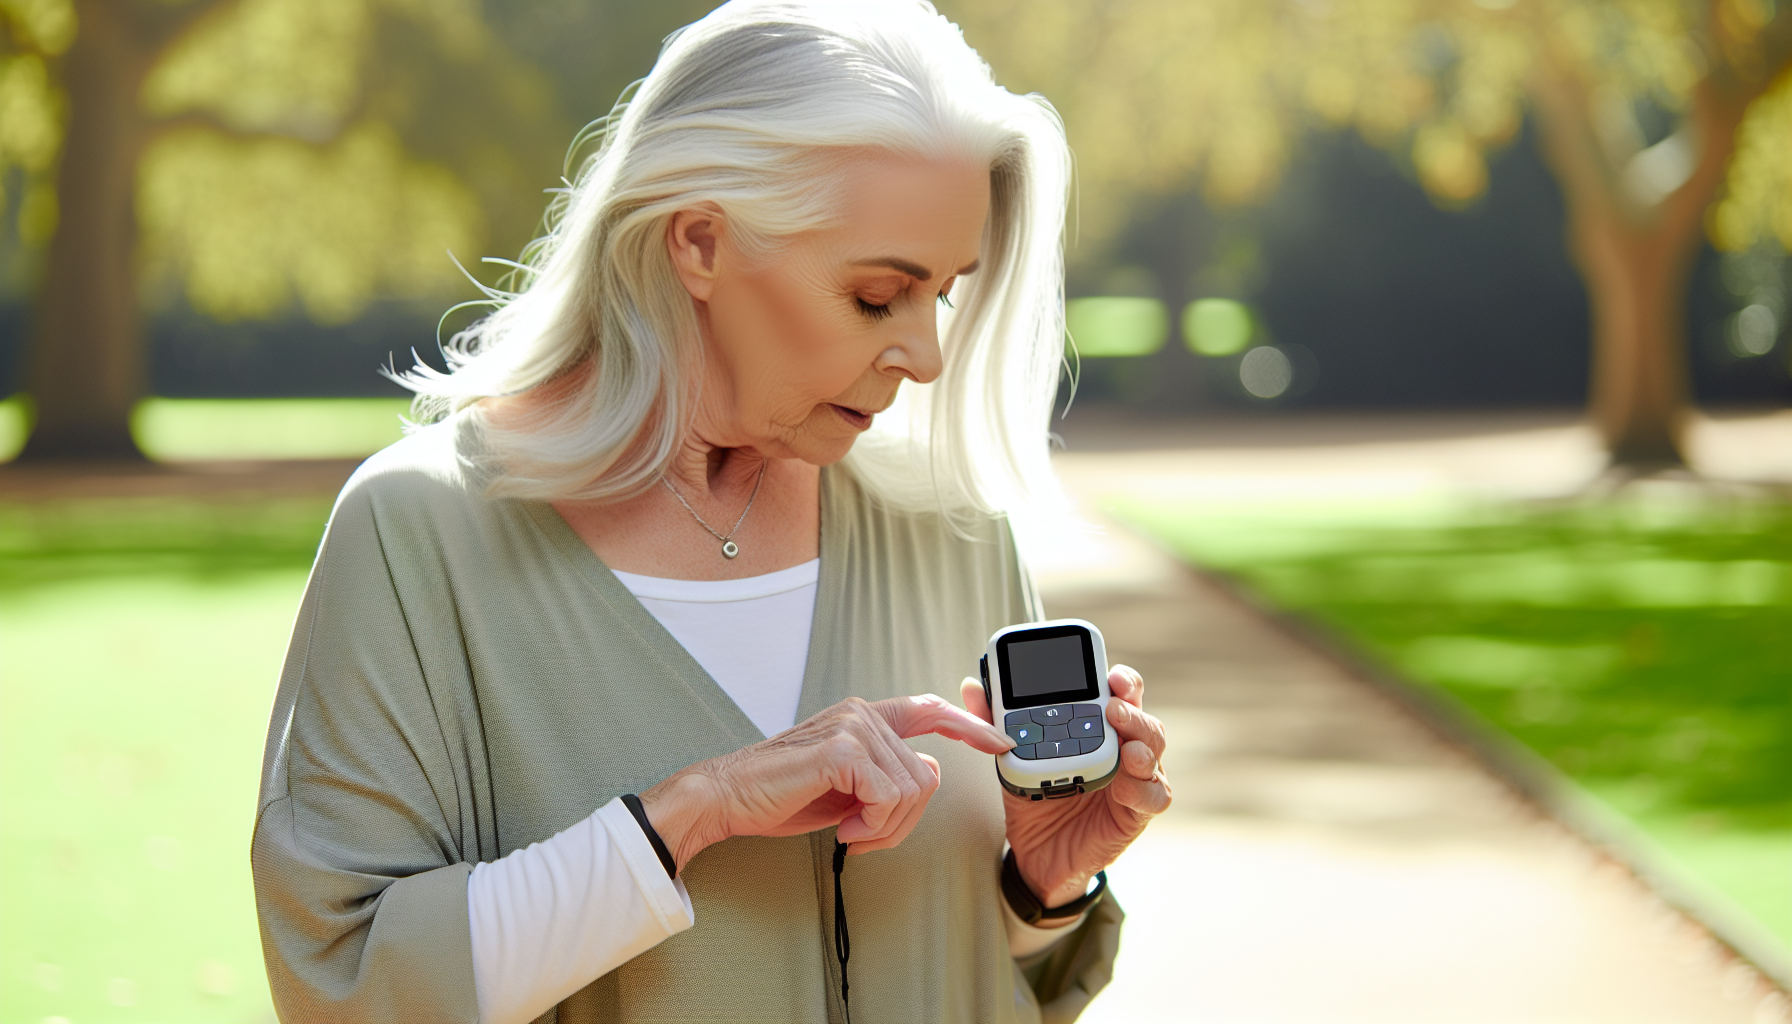 Senior woman using a mobile medical alert device outdoors